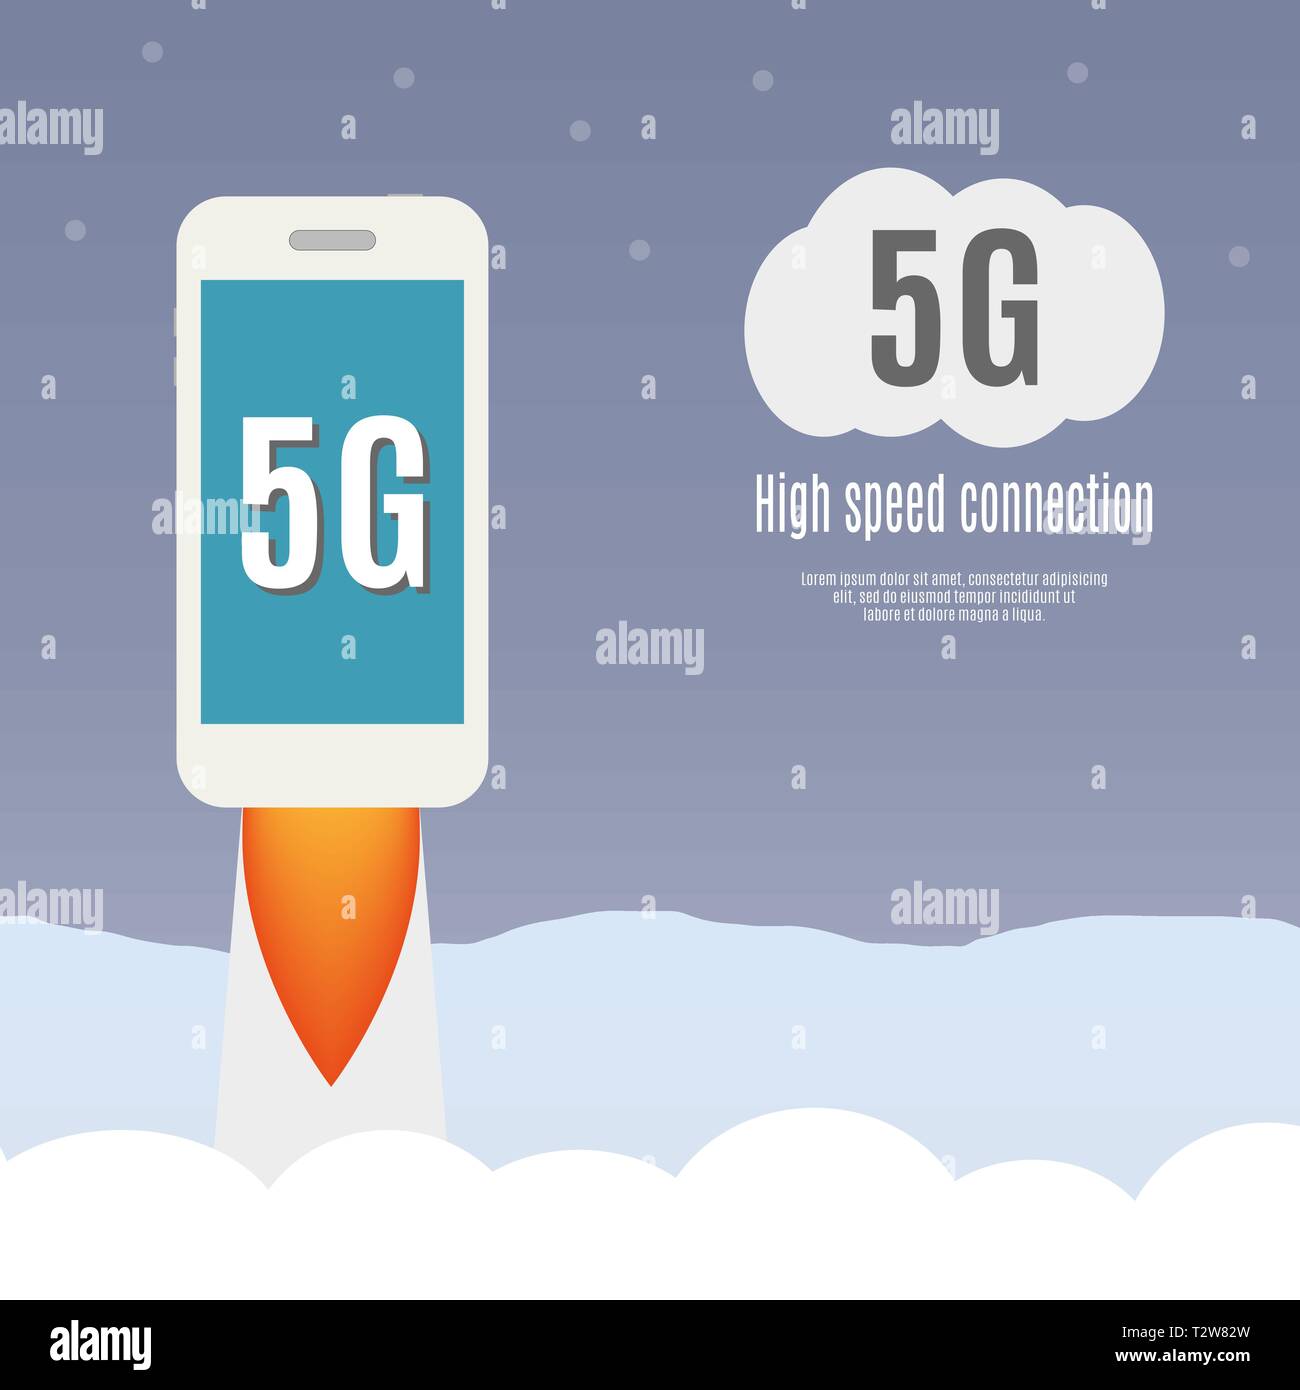 5g template with smartphone flying. High speed mobile web technology. vector illustration. Stock Vector